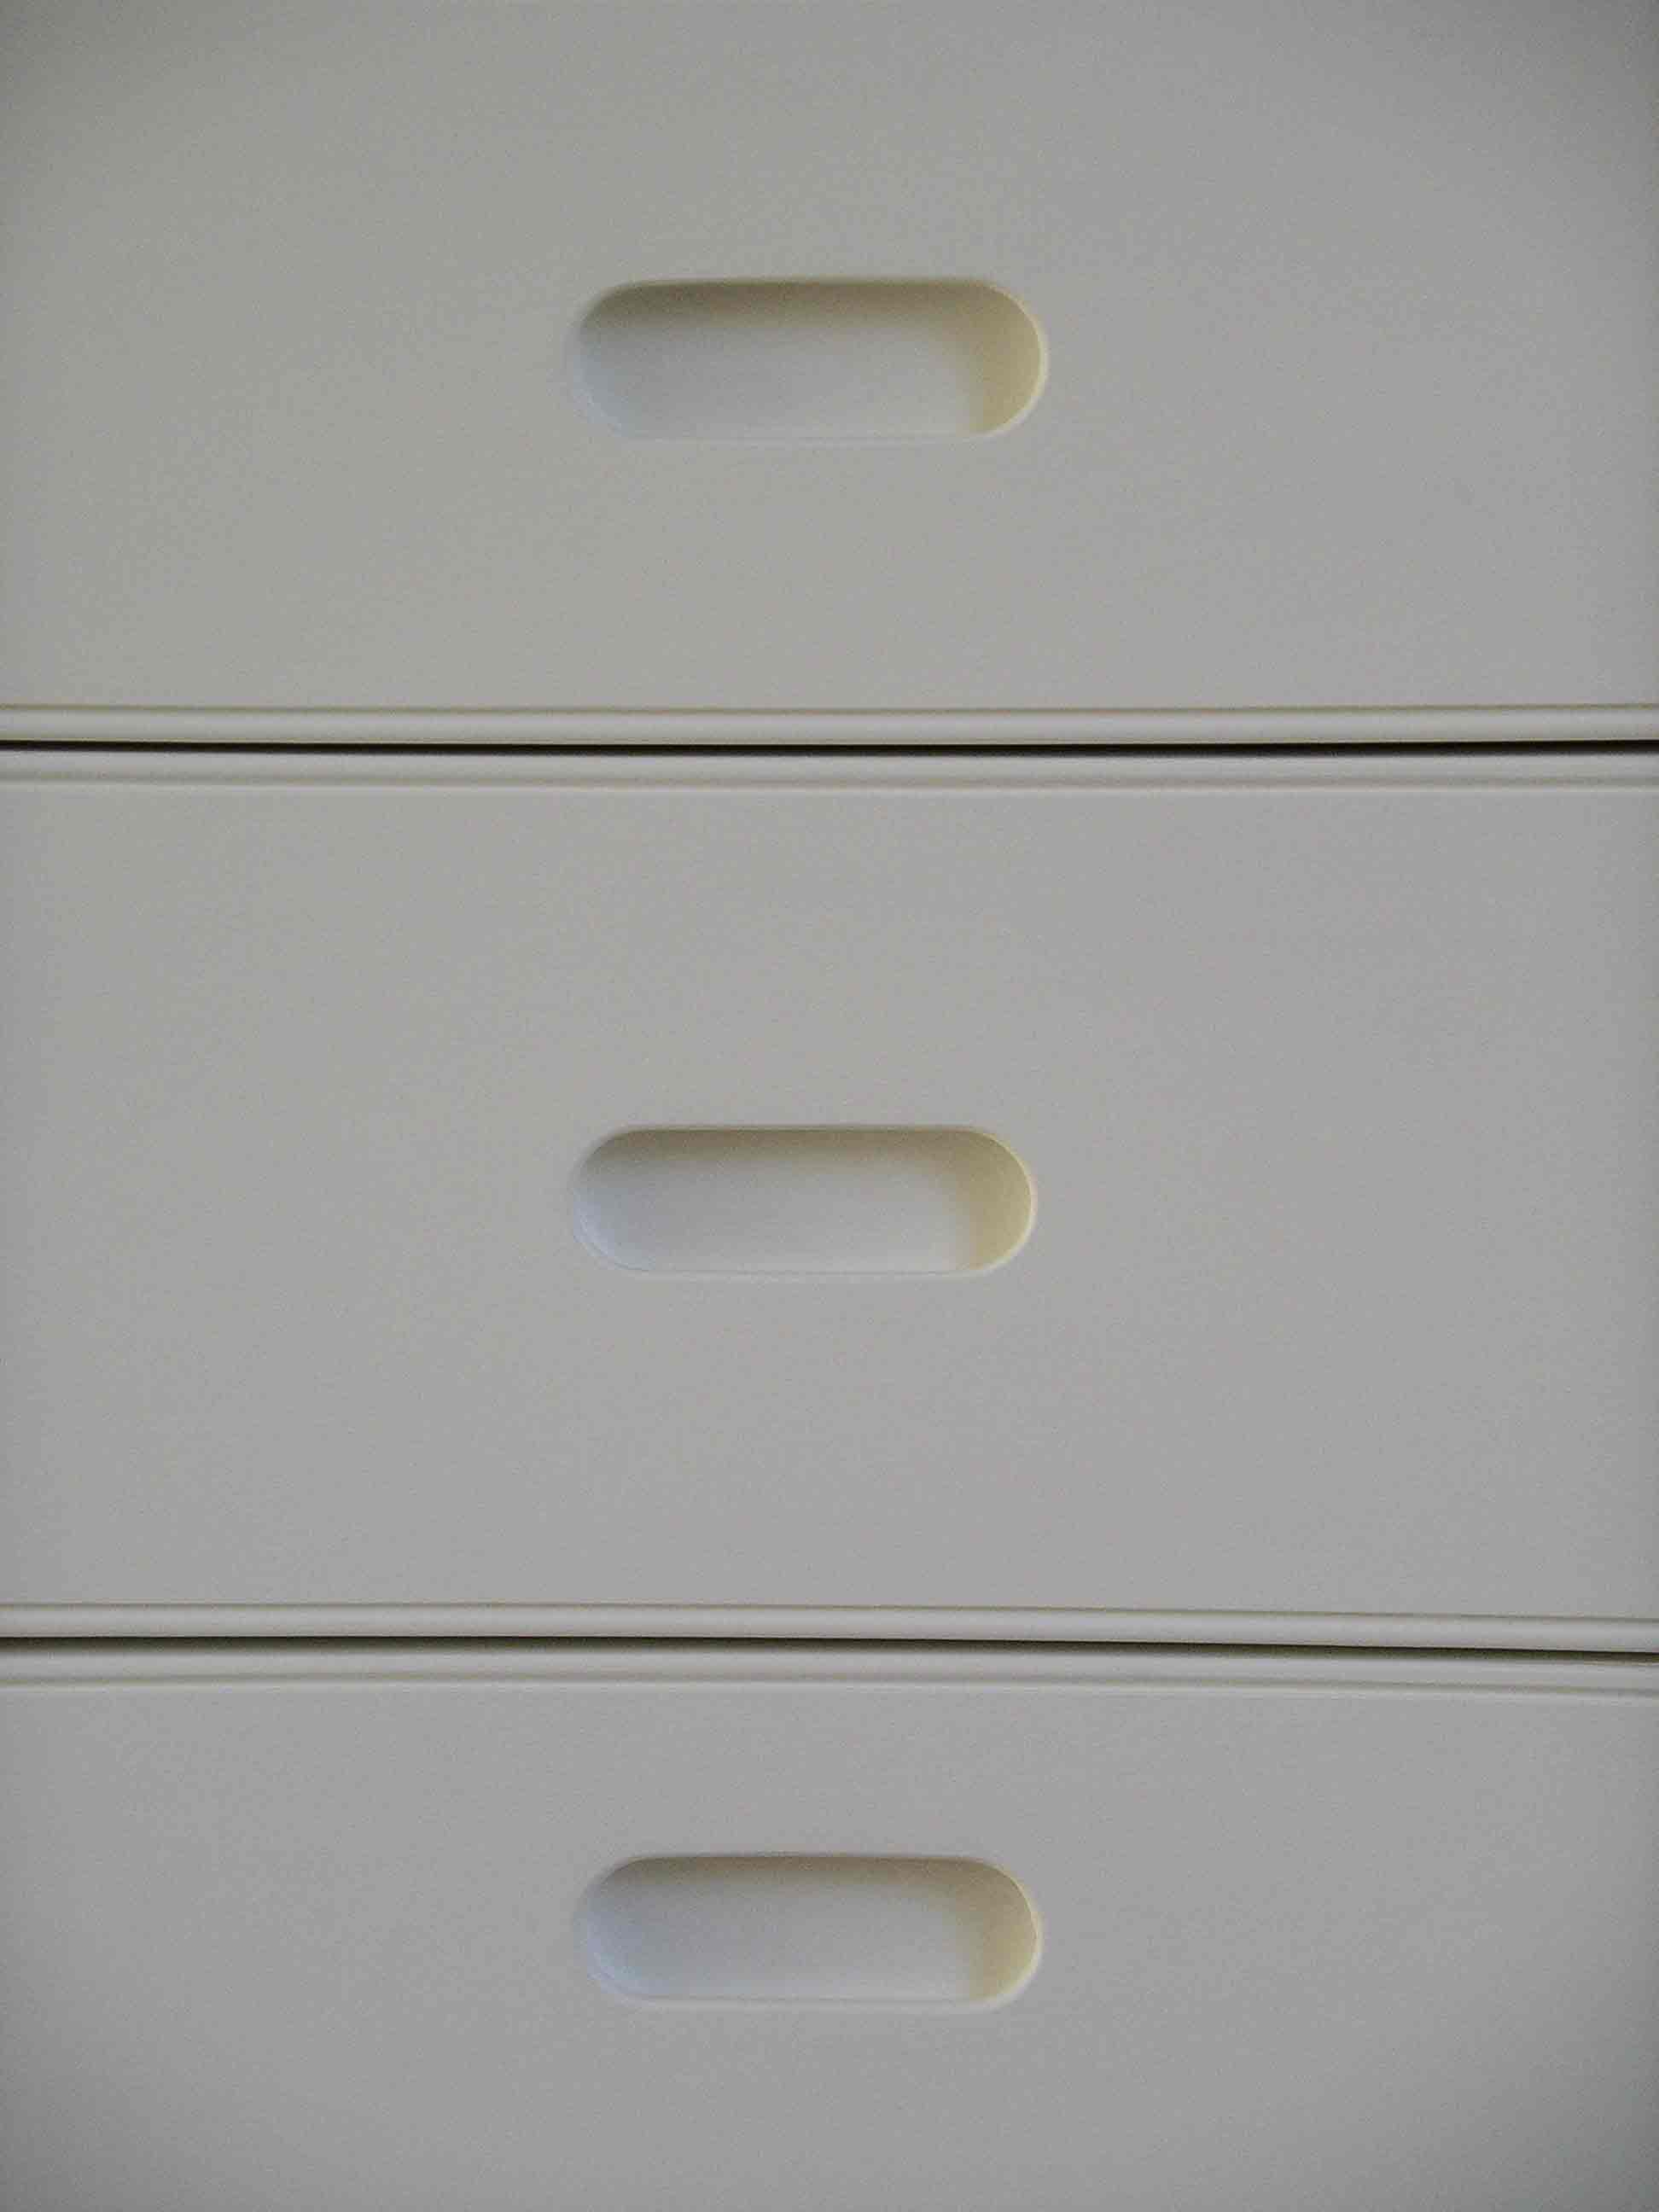 handmade kitchen drawers with integral inset handles